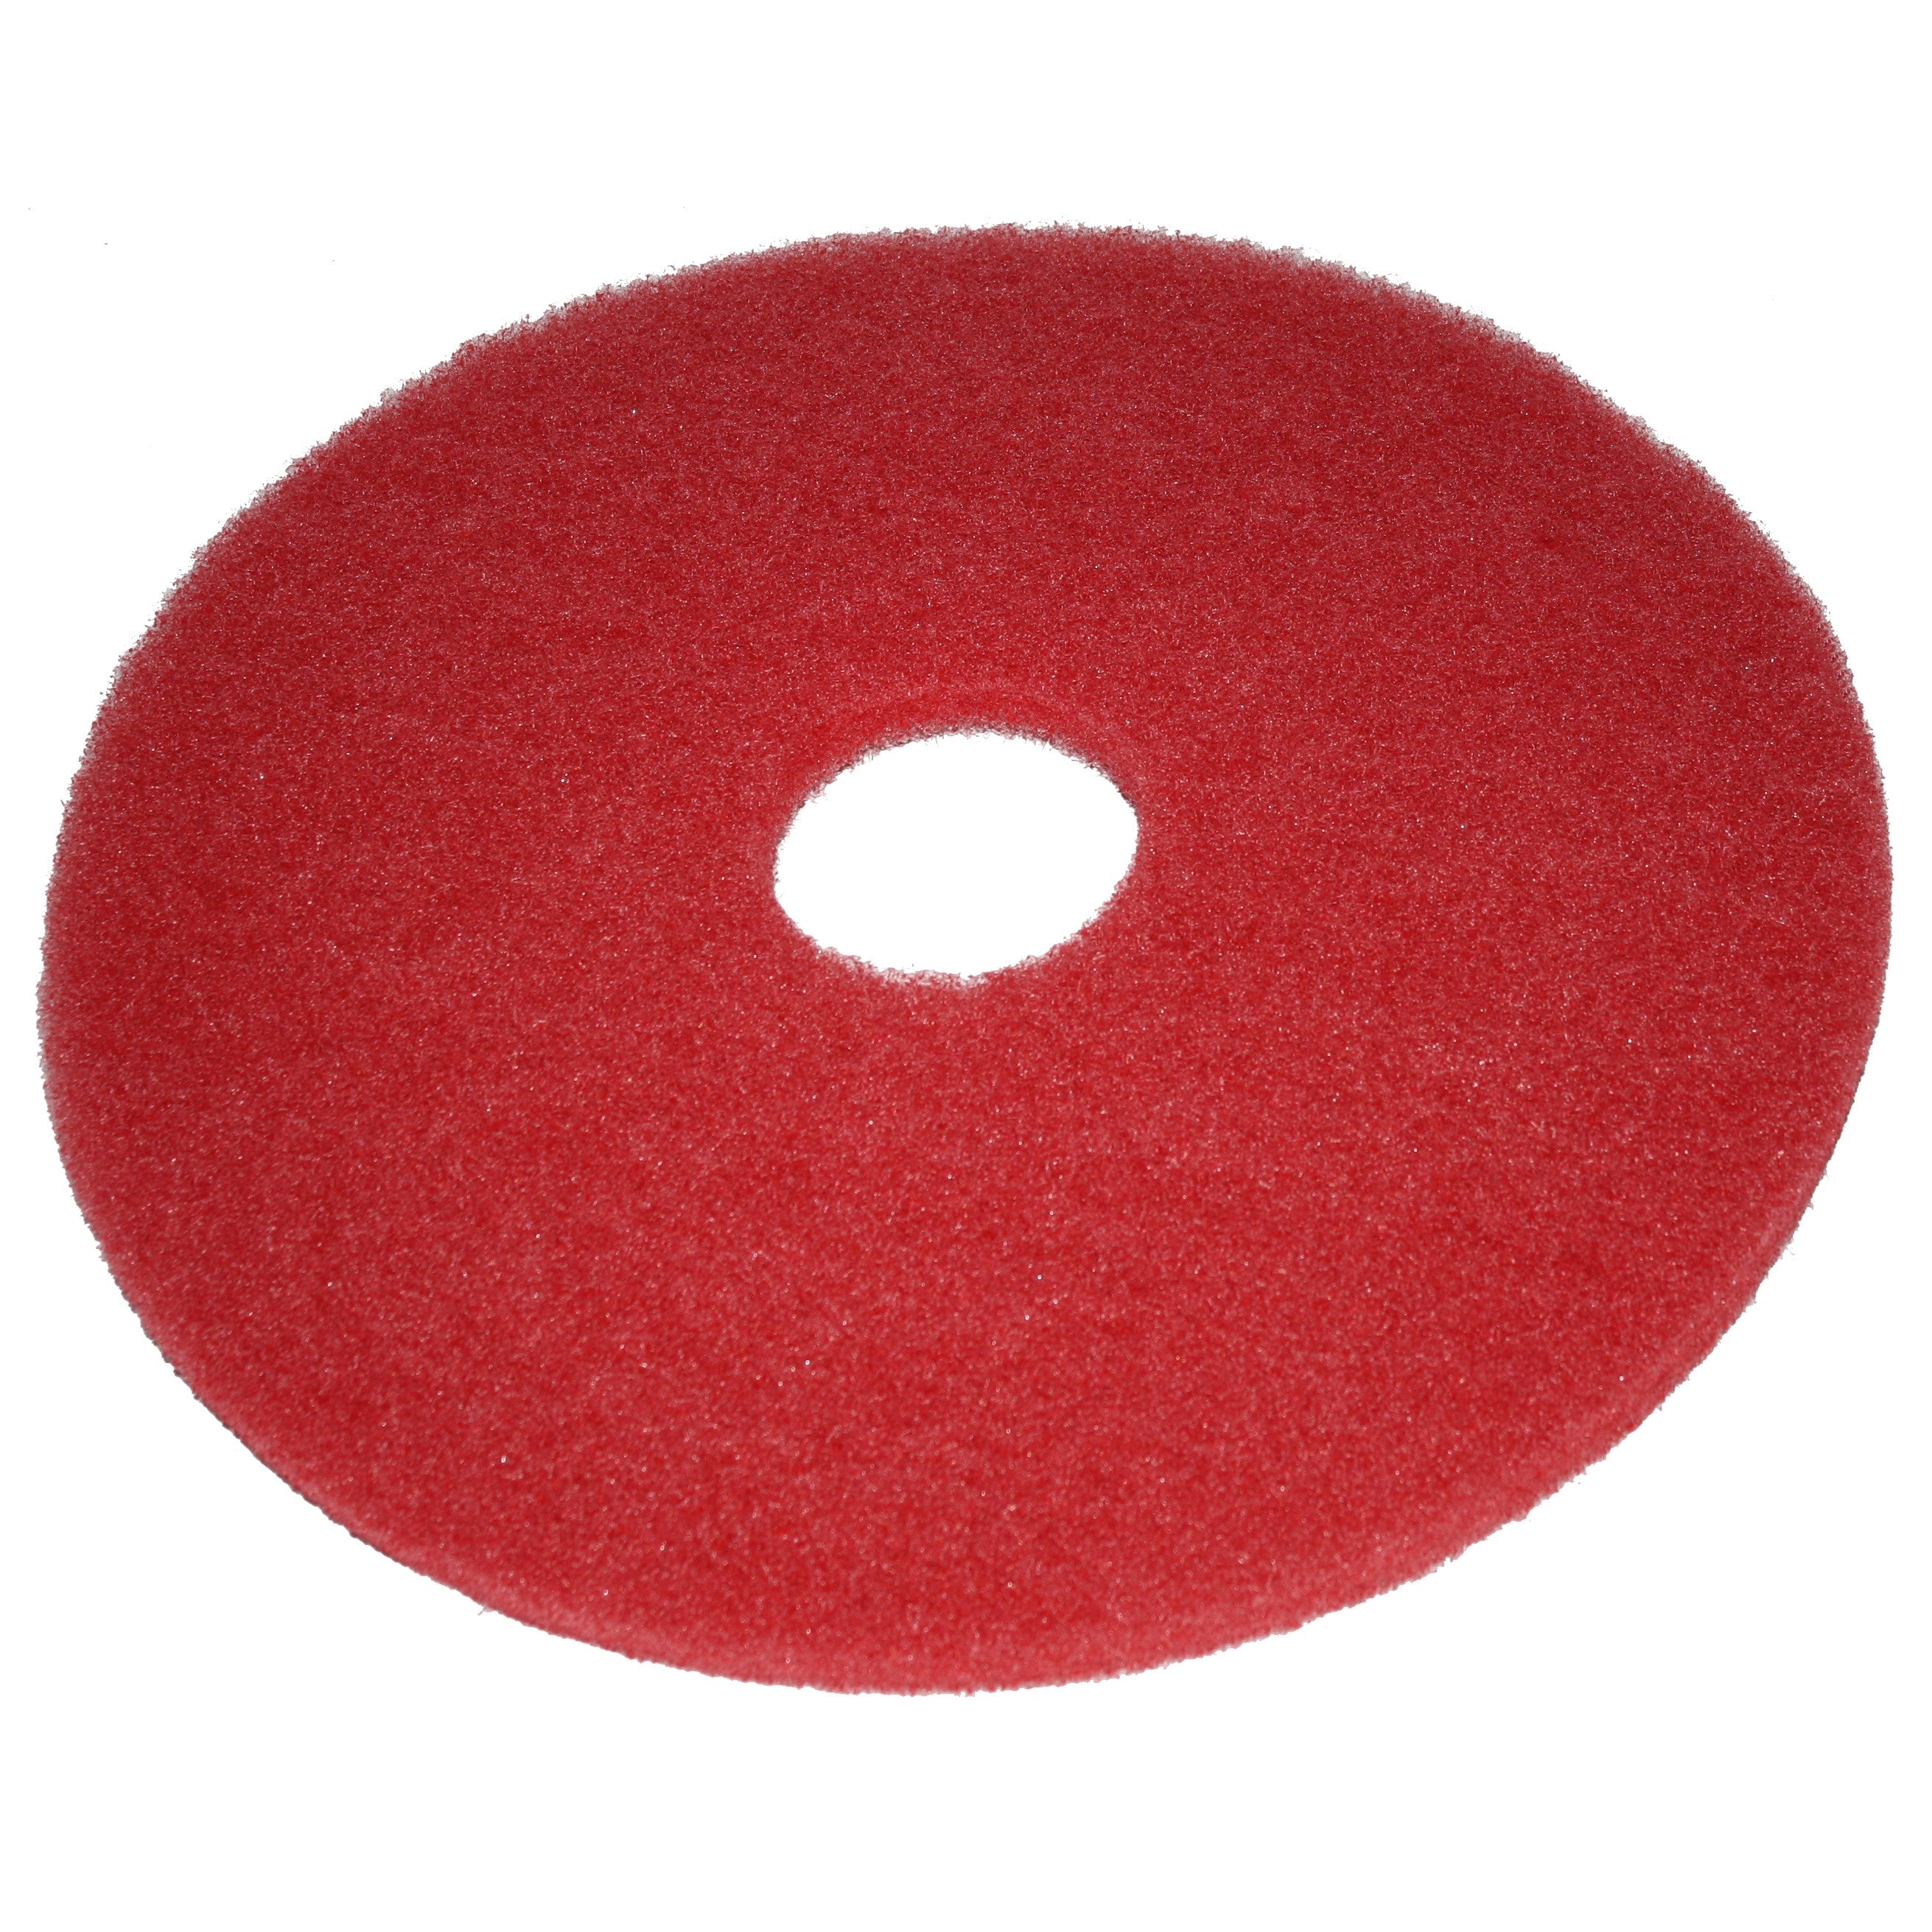 Pad rouge, Ø 254 mm, polyester